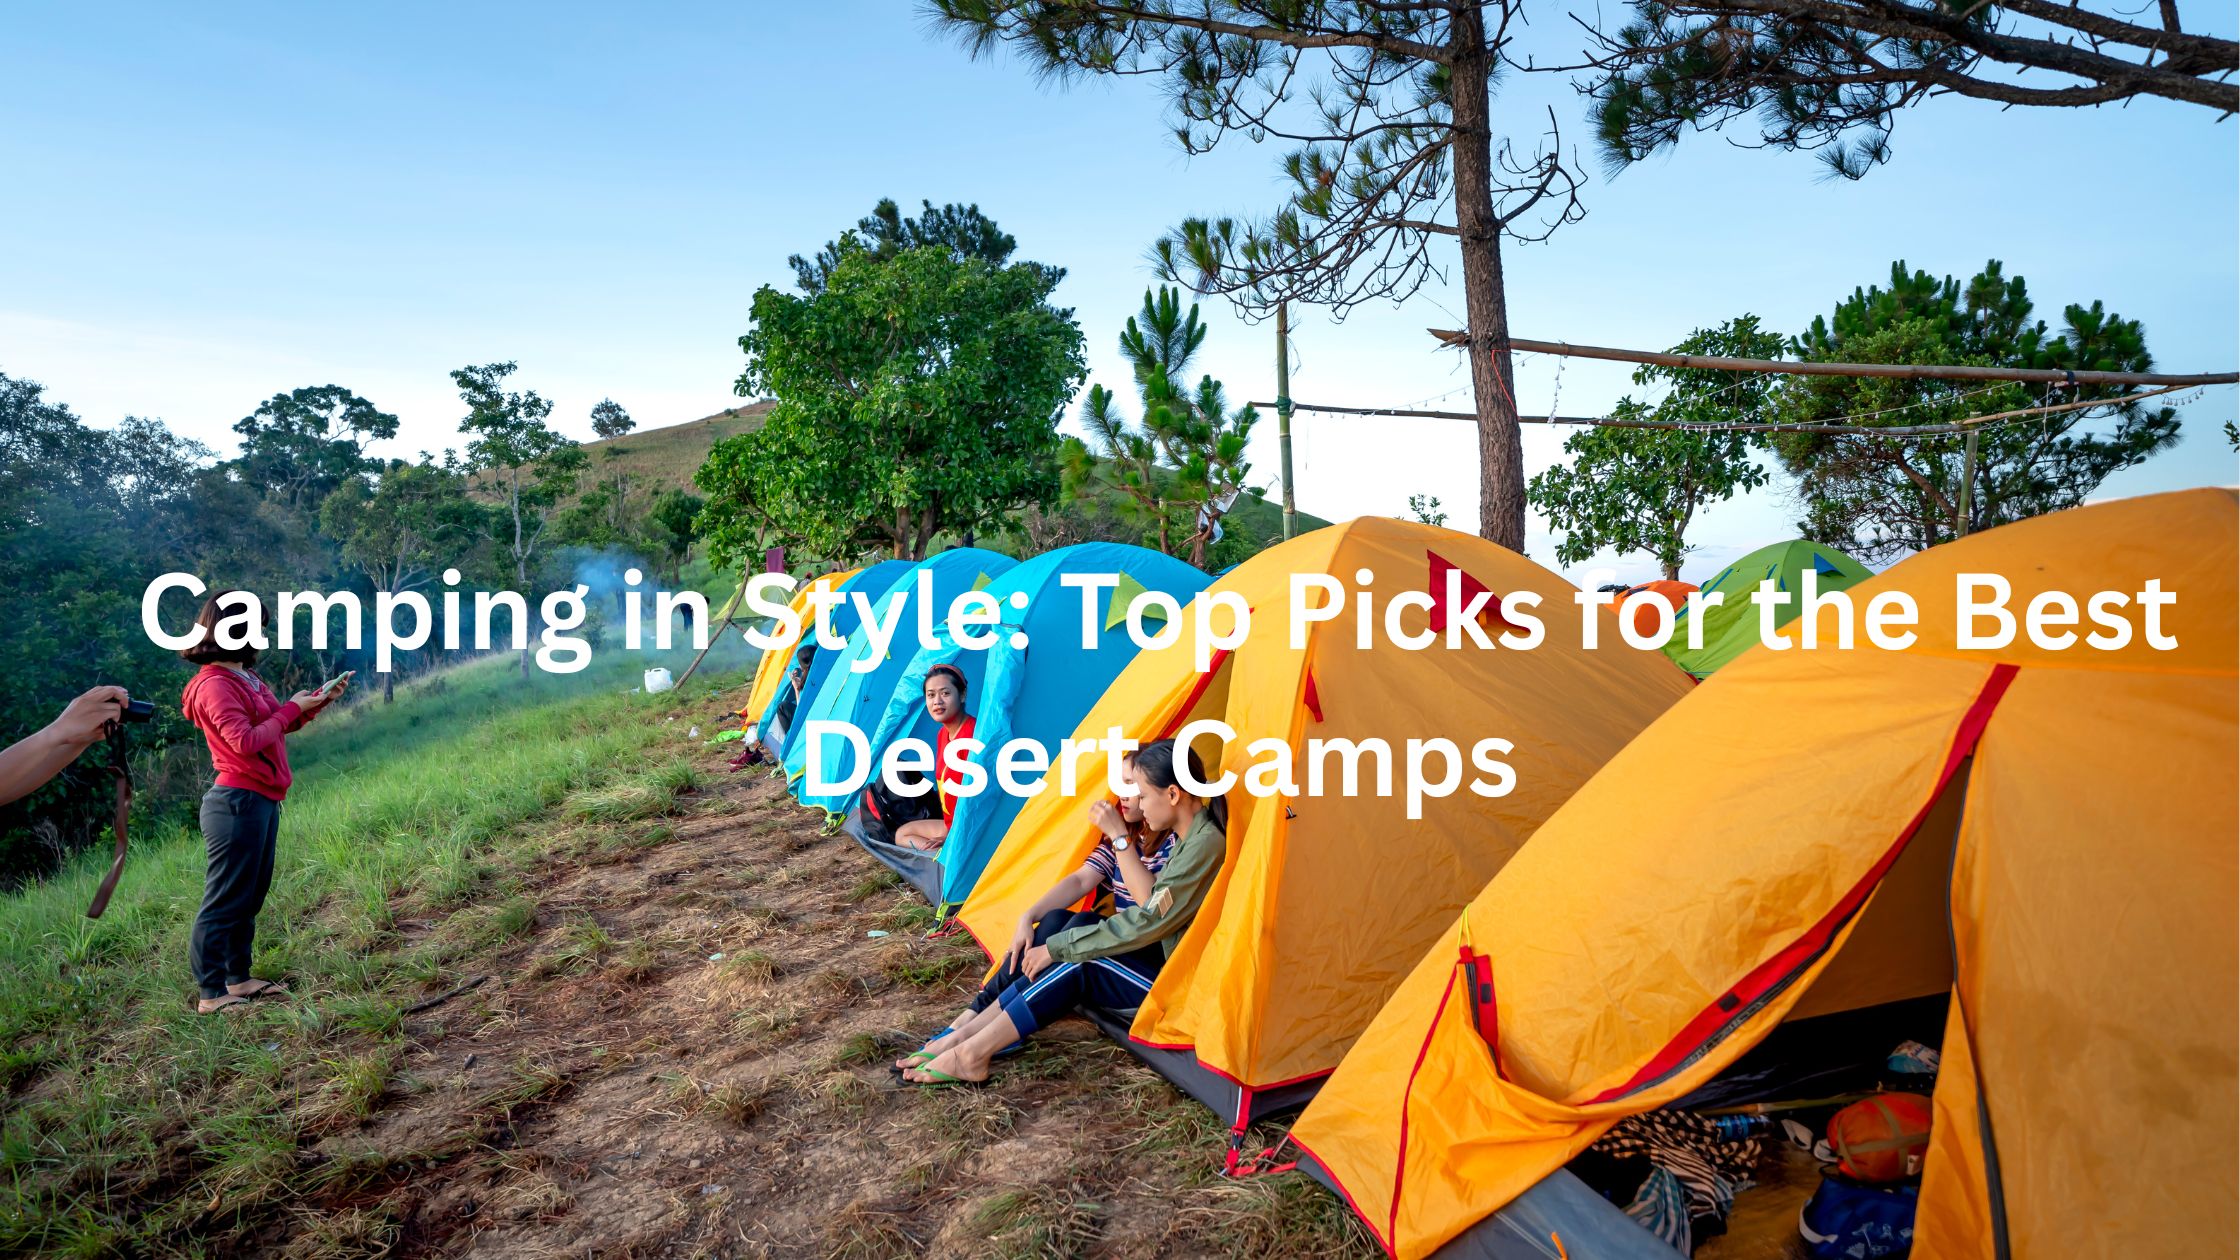 Camping in Style: Top Picks for the Best Desert Camps